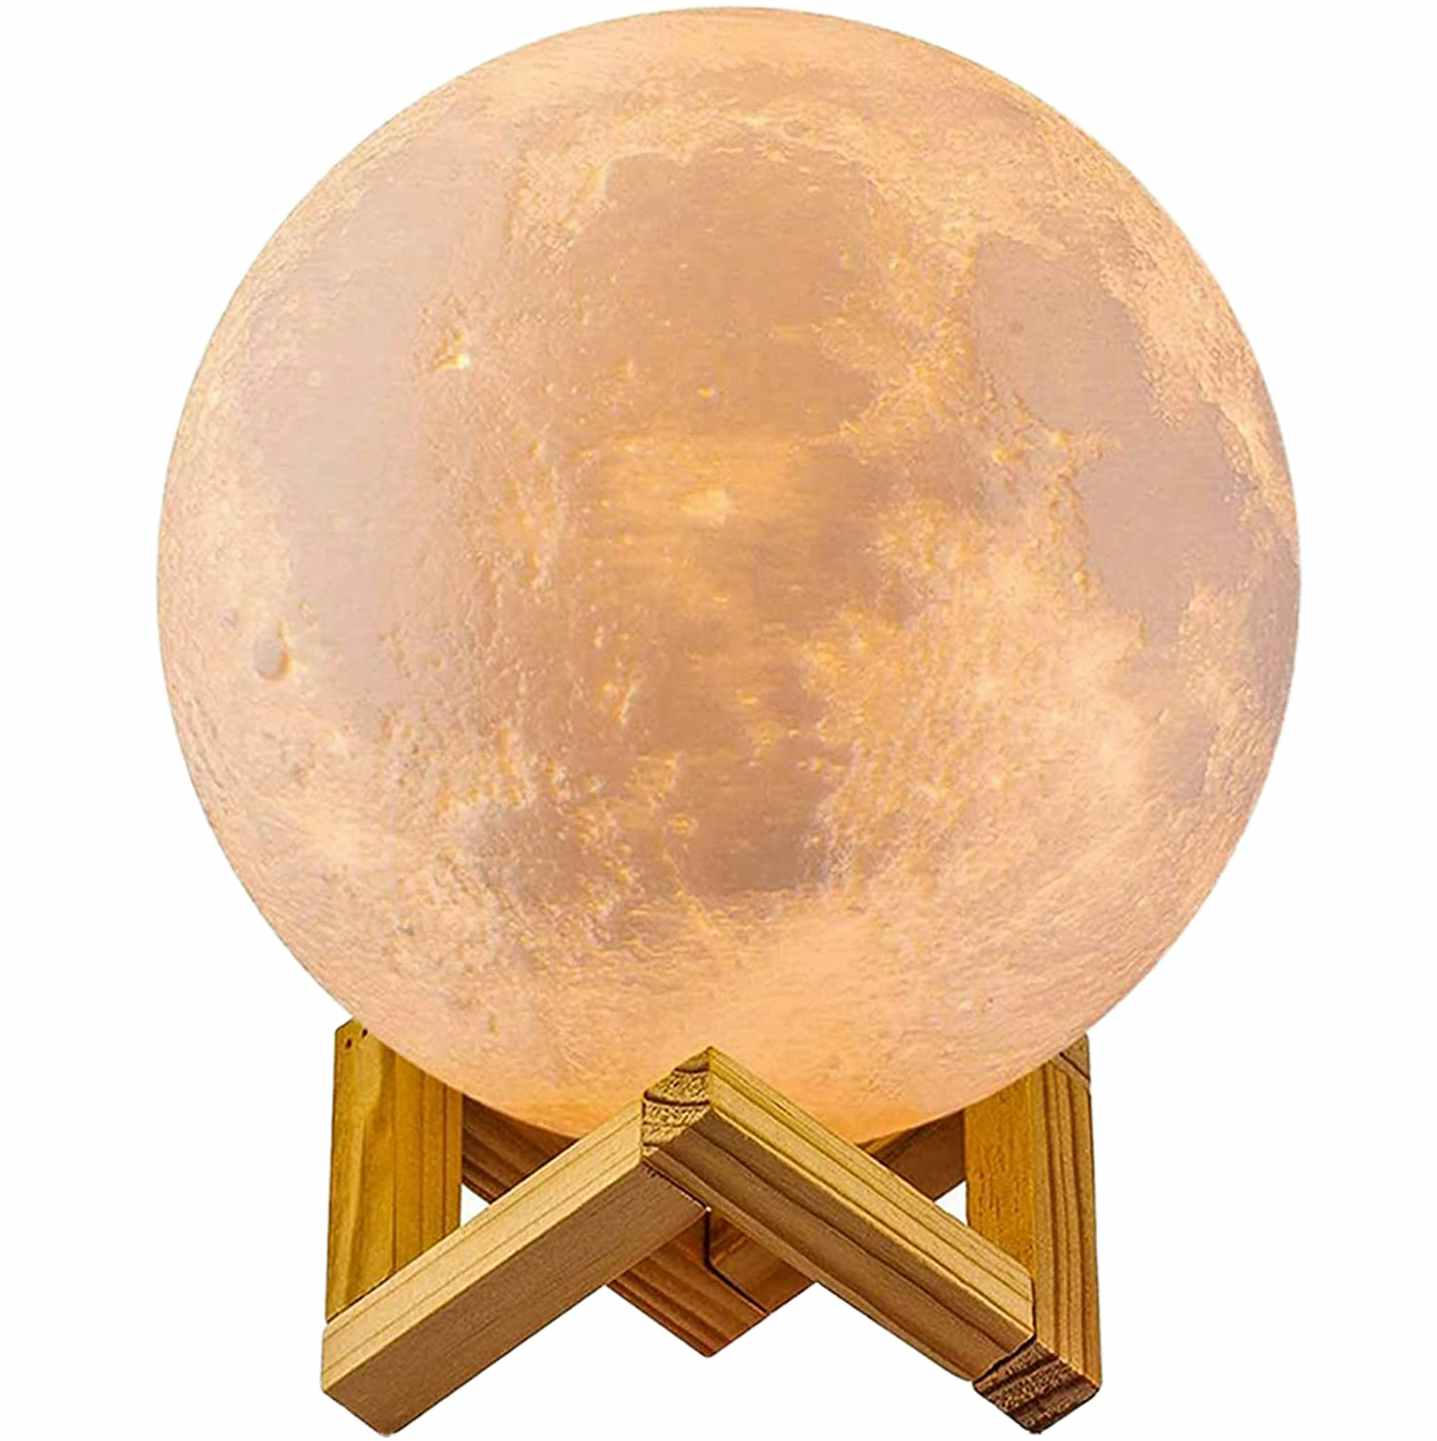 secret santa gifts - a glowing moon lamp on a wooden stand